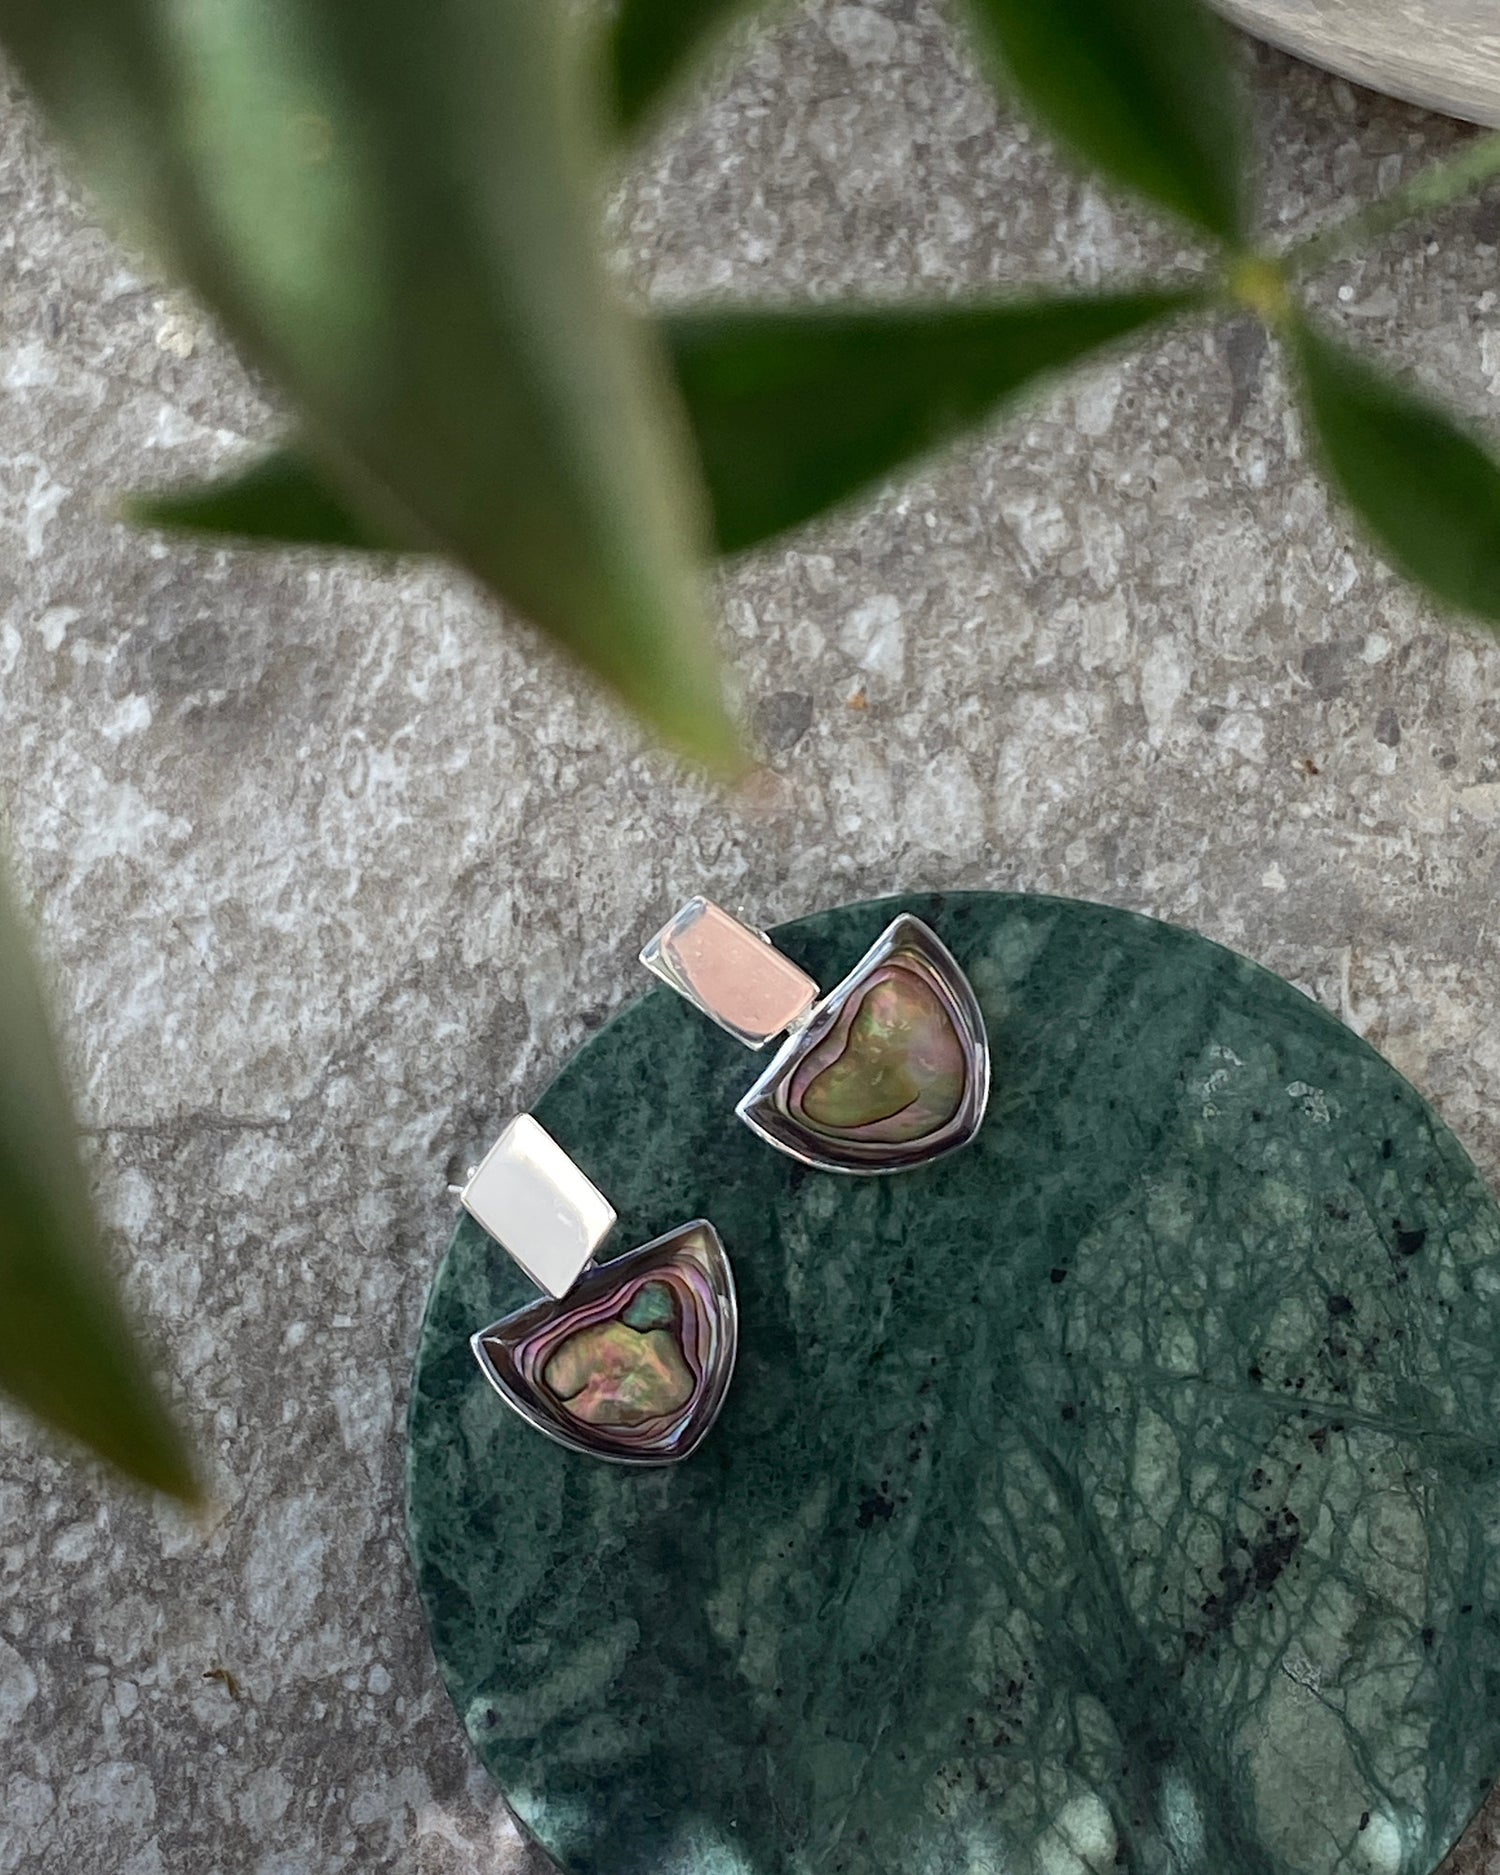 Silver and abalone earrings sit of a green marble circle on a concrete background